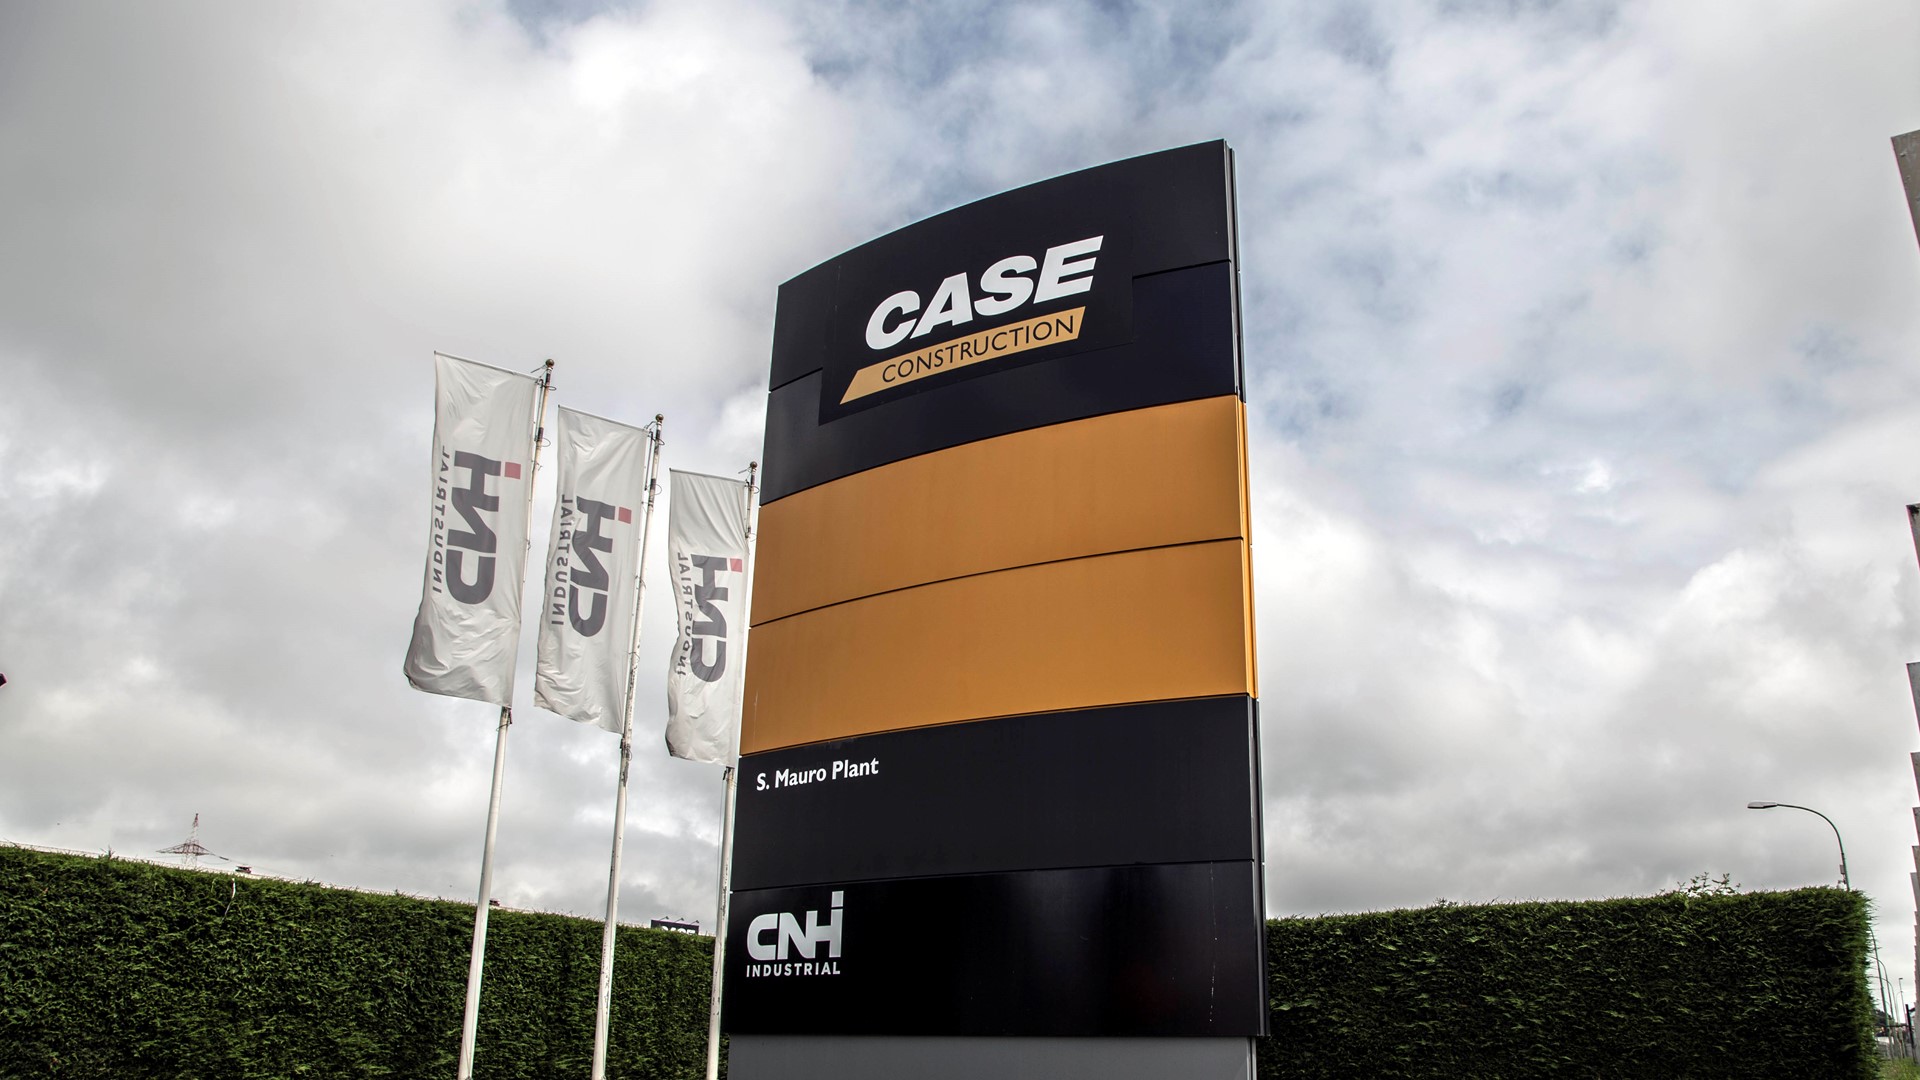 Case Construction Equipment's facility in San Mauro, Italy